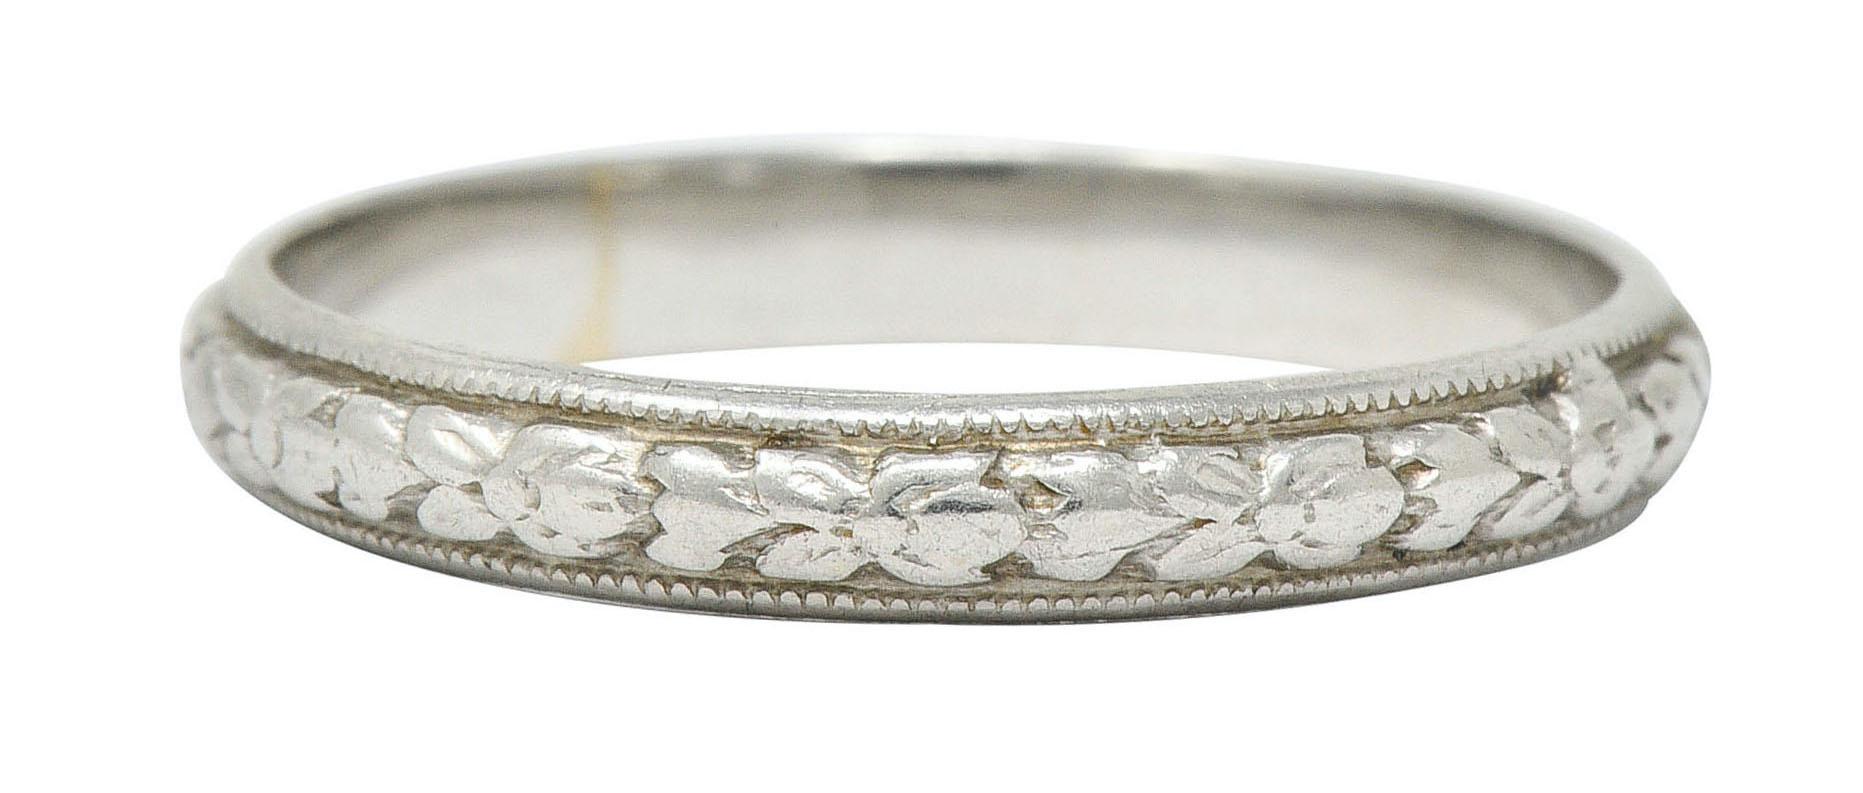 Band ring features a highly rendered motif of orange blossoms and foliate

Flanked by milgrain edges

Stamped Plat for platinum

Circa: 1930s

Ring Size: 6 & not sizable

Measures: 2.8 mm wide and sits 1.3 mm high

Total weight: 2.8